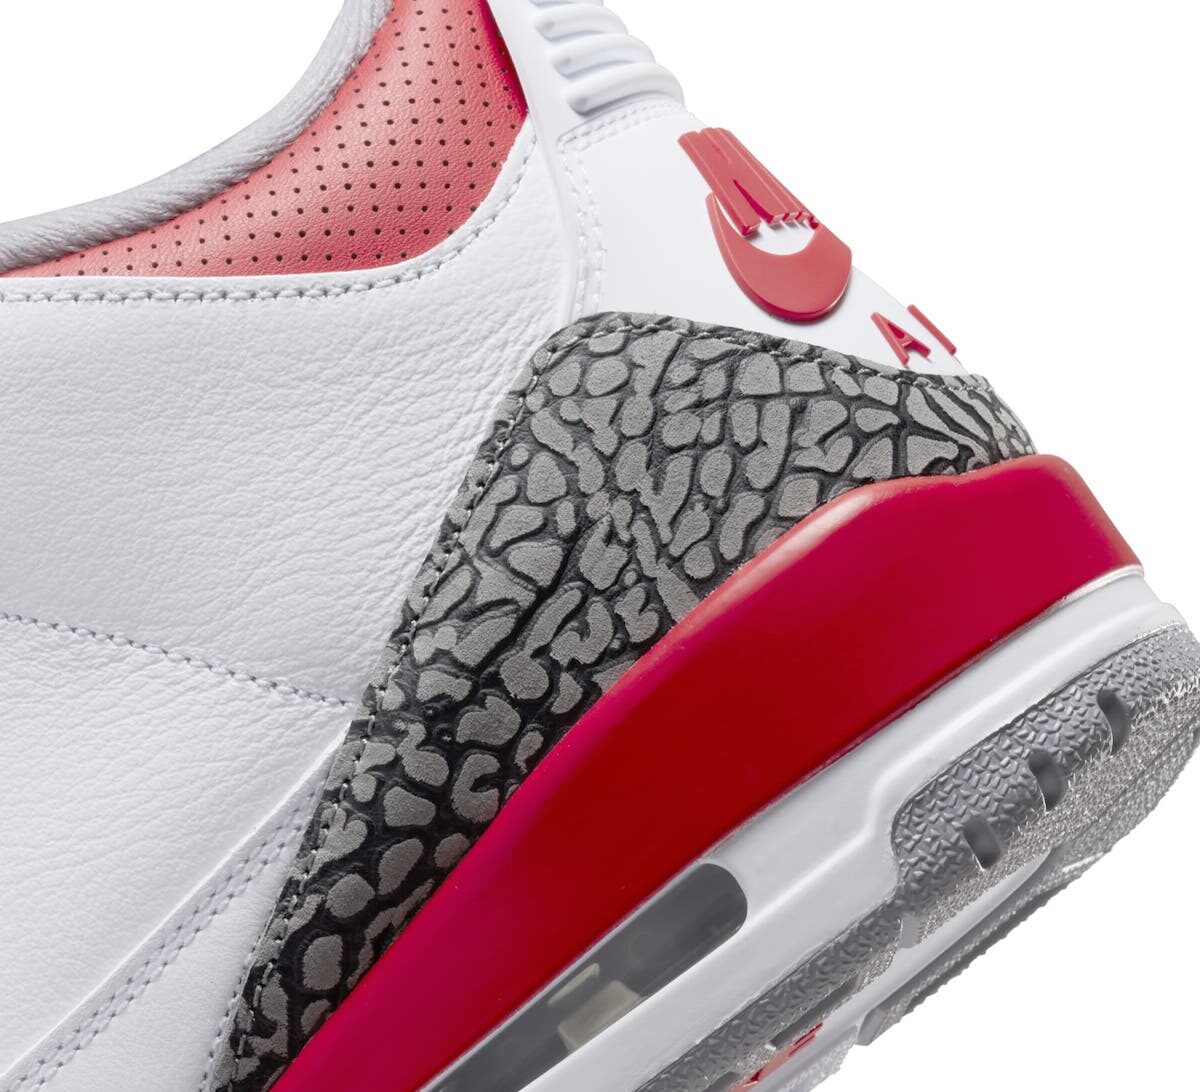 Where To Buy The Air Jordan 3 Retro “Fire Red”